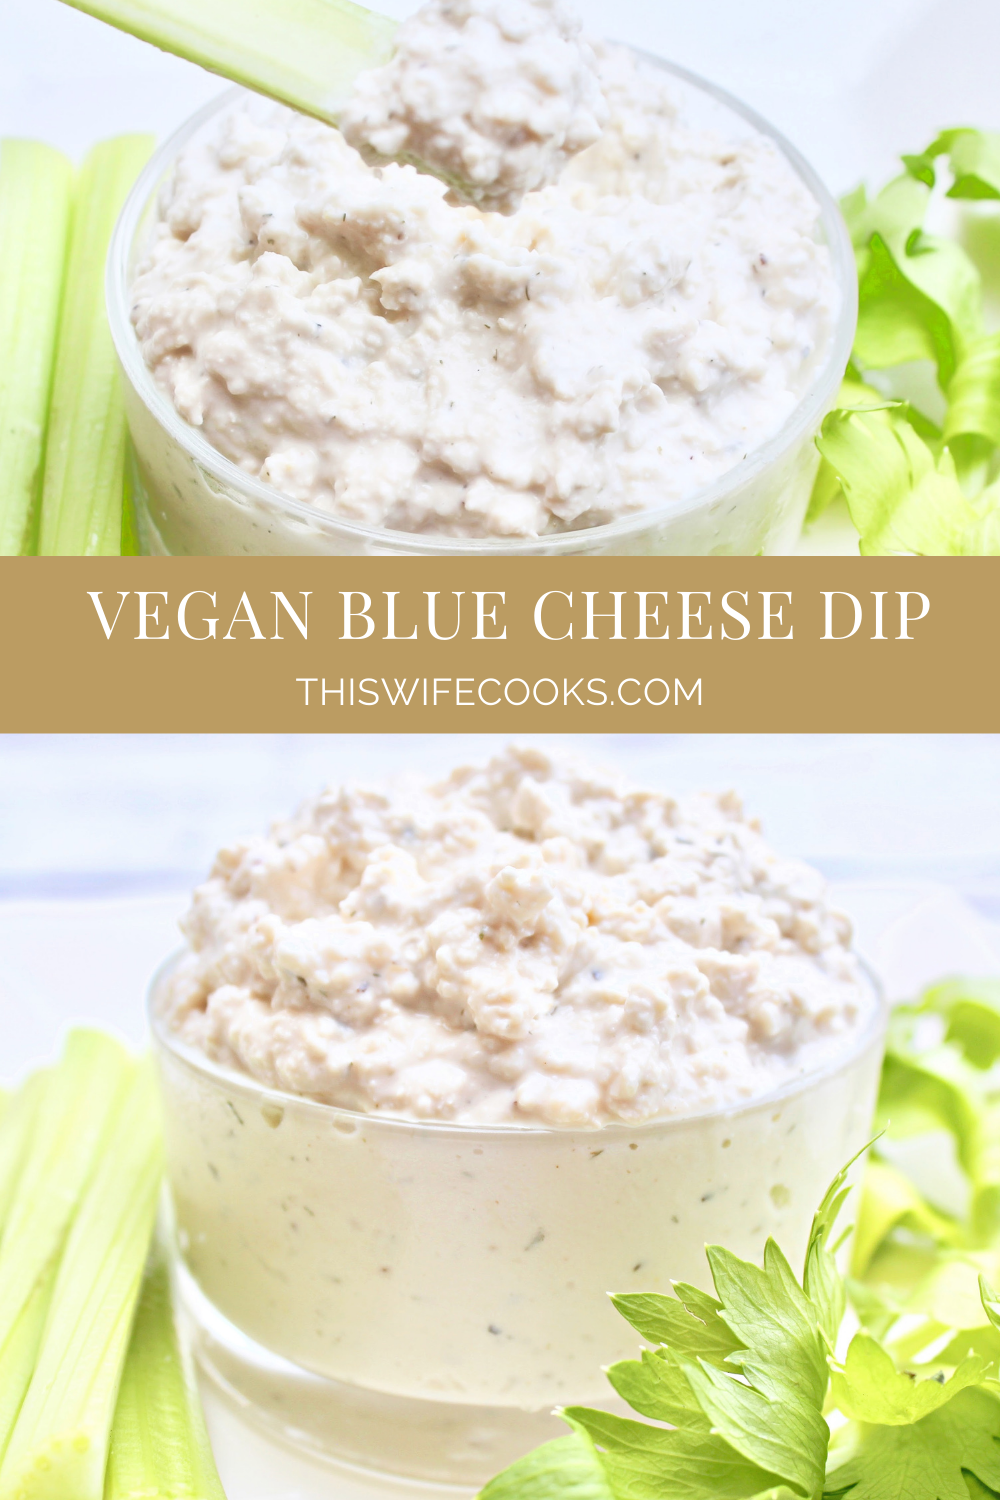 Vegan Blue Cheese Dip ~ 5 minutes and a handful of ingredients are all you need to whip up this tangy, dairy-free version of classic blue cheese dip. via @thiswifecooks